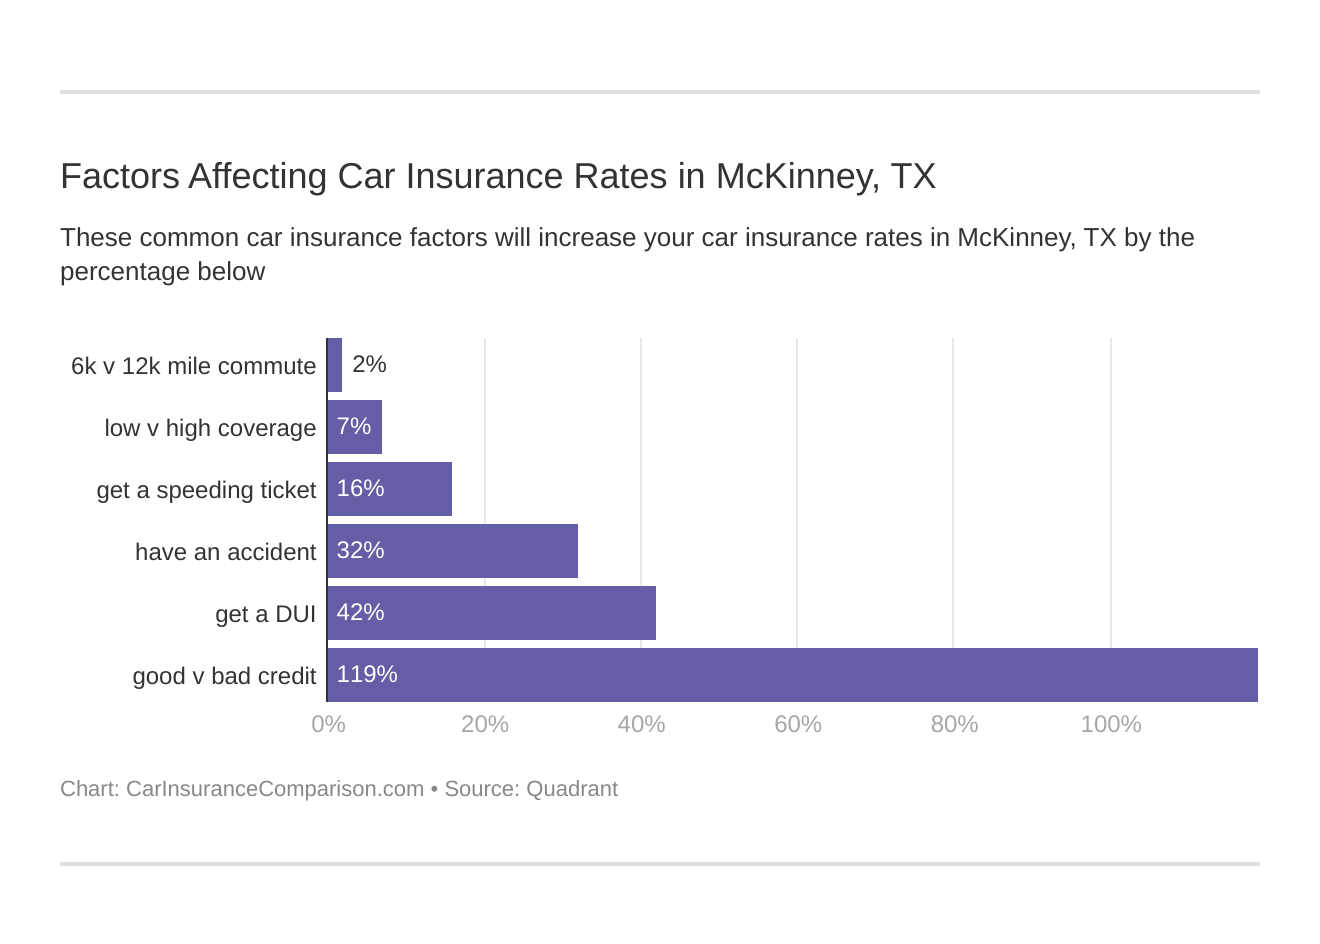 Factors Affecting Car Insurance Rates in McKinney, TX